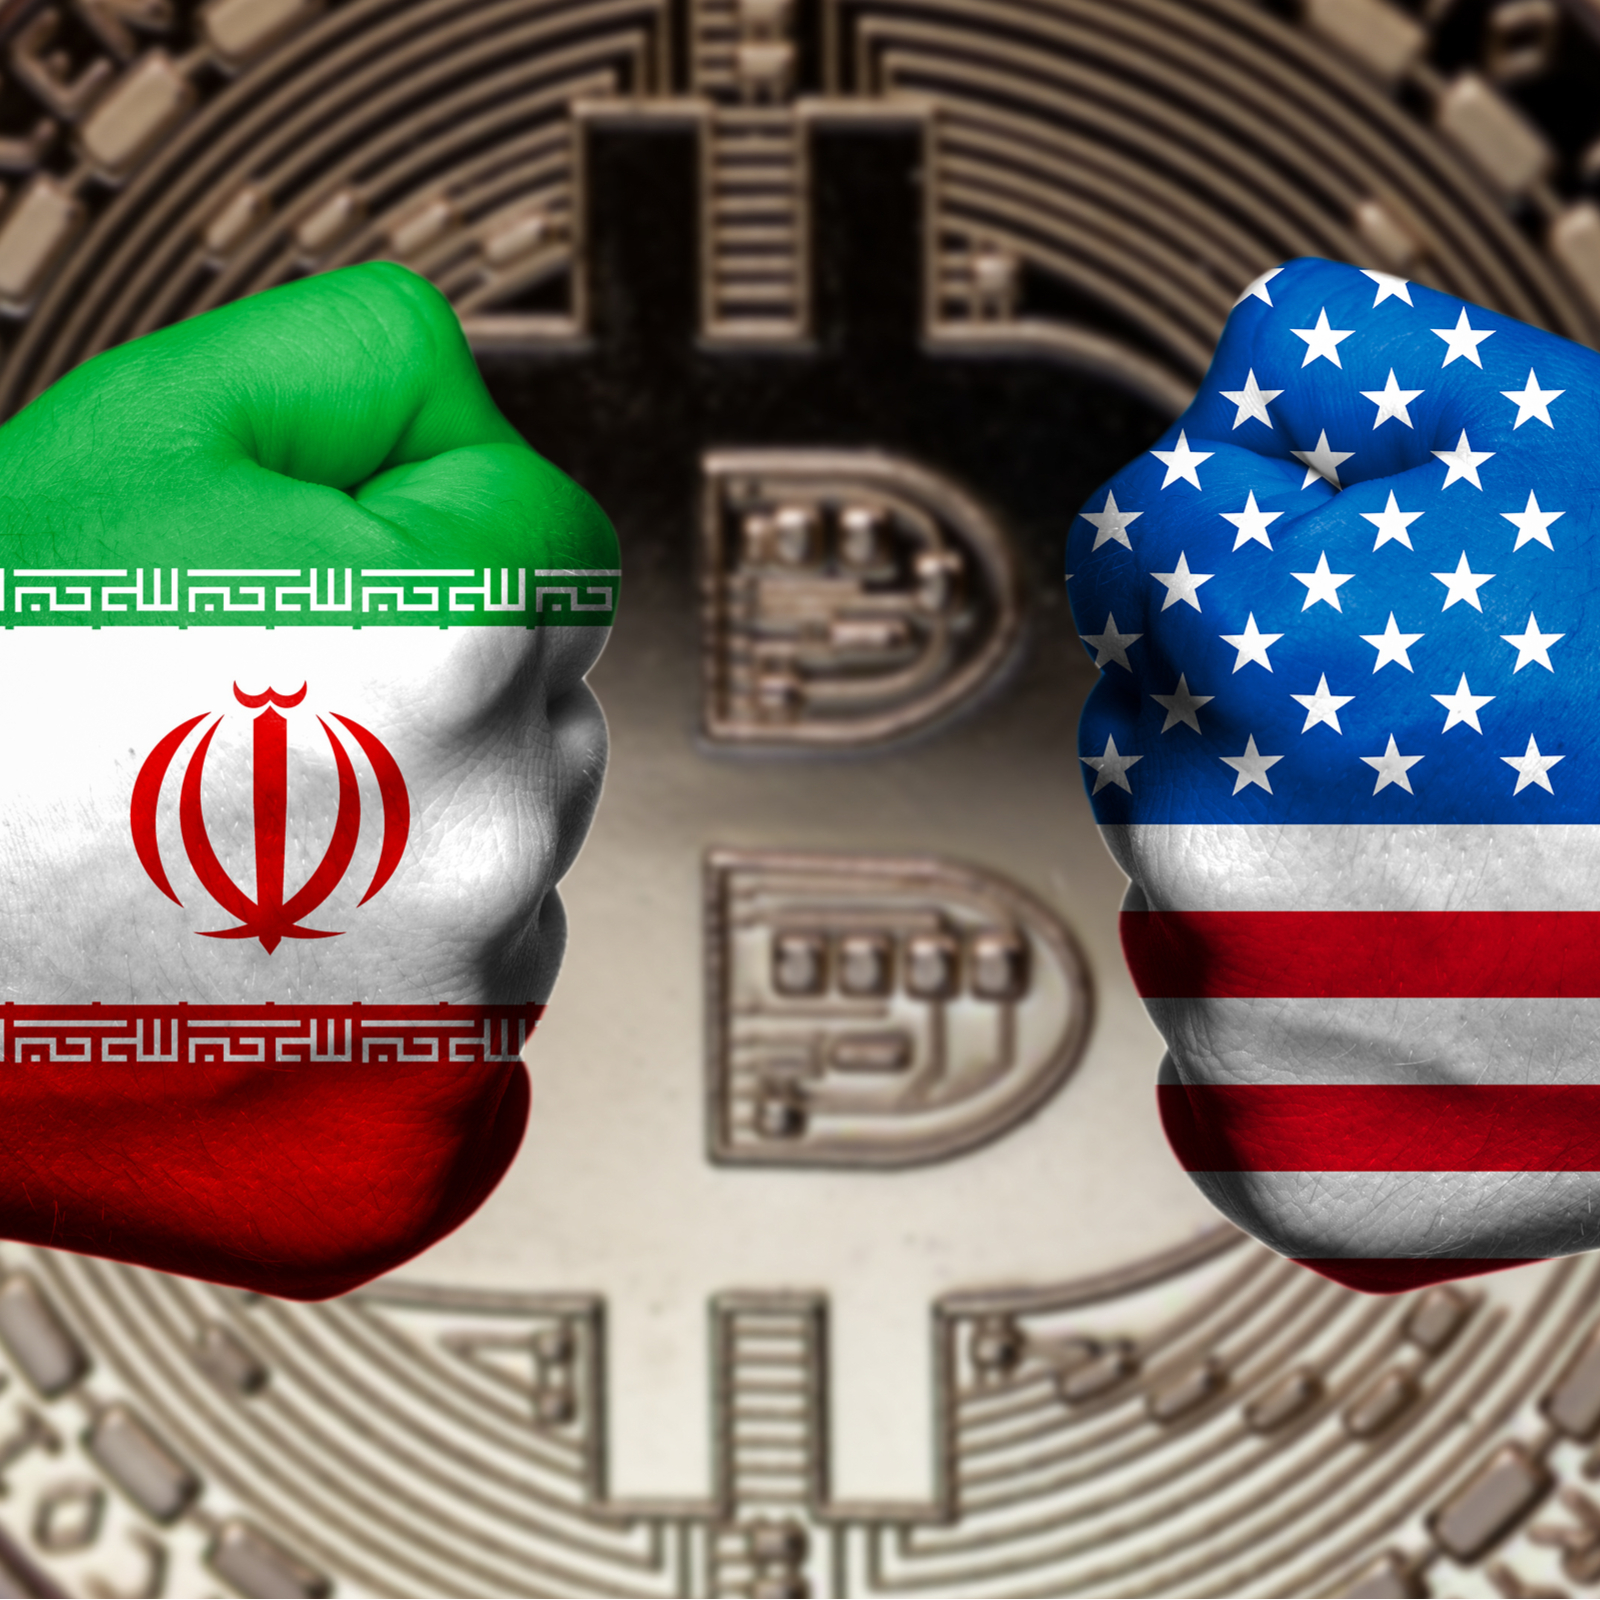 Fincen Claims Iran Is Using Crypto to Evade Sanctions